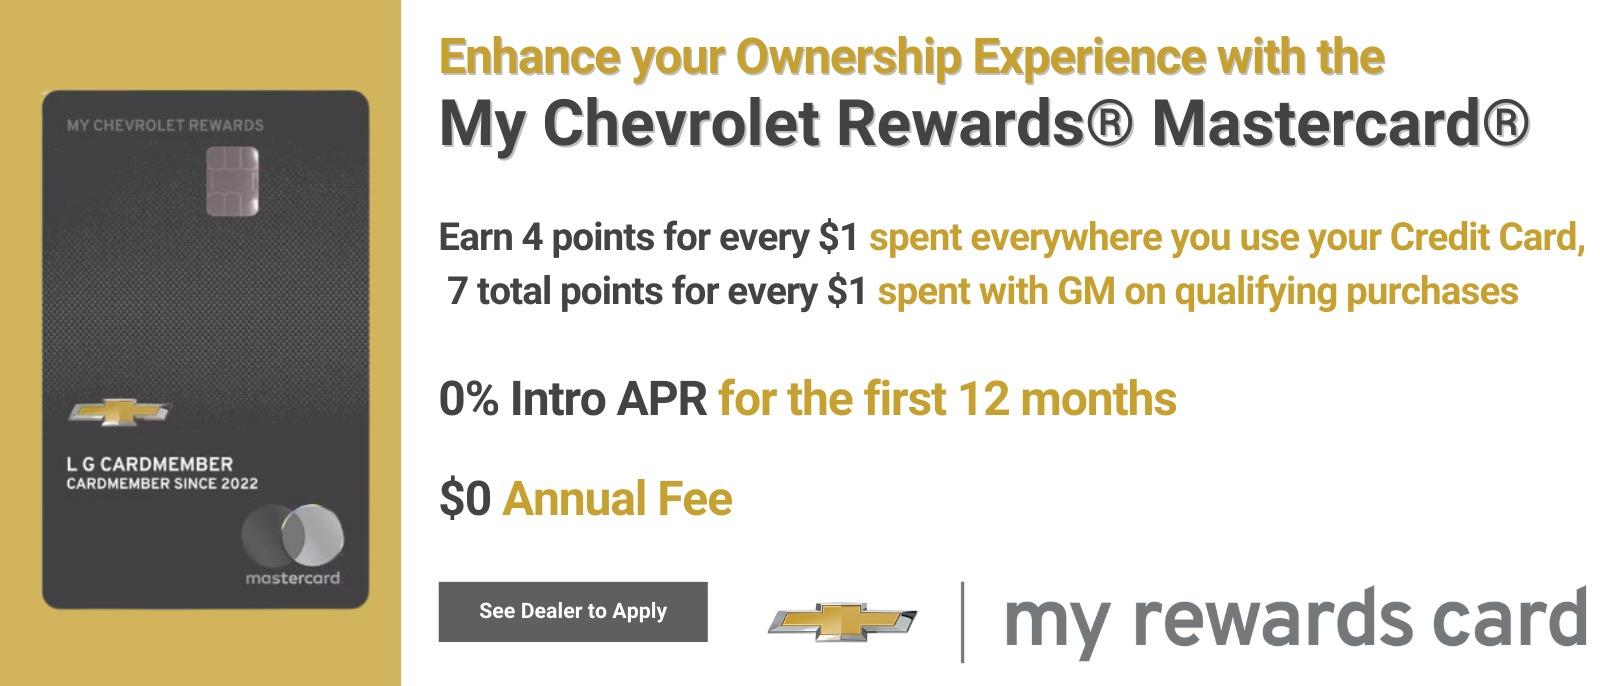 Enhance your Ownership Experience with the My Chevrolet Rewards® Mastercard® Earn 4 points for every $1 spent everywhere you use your Credit Card, 7 total points for every $1 spent with GM on qualifying purchases 0% Intro APR for the first 12 months $0 Annual Fee